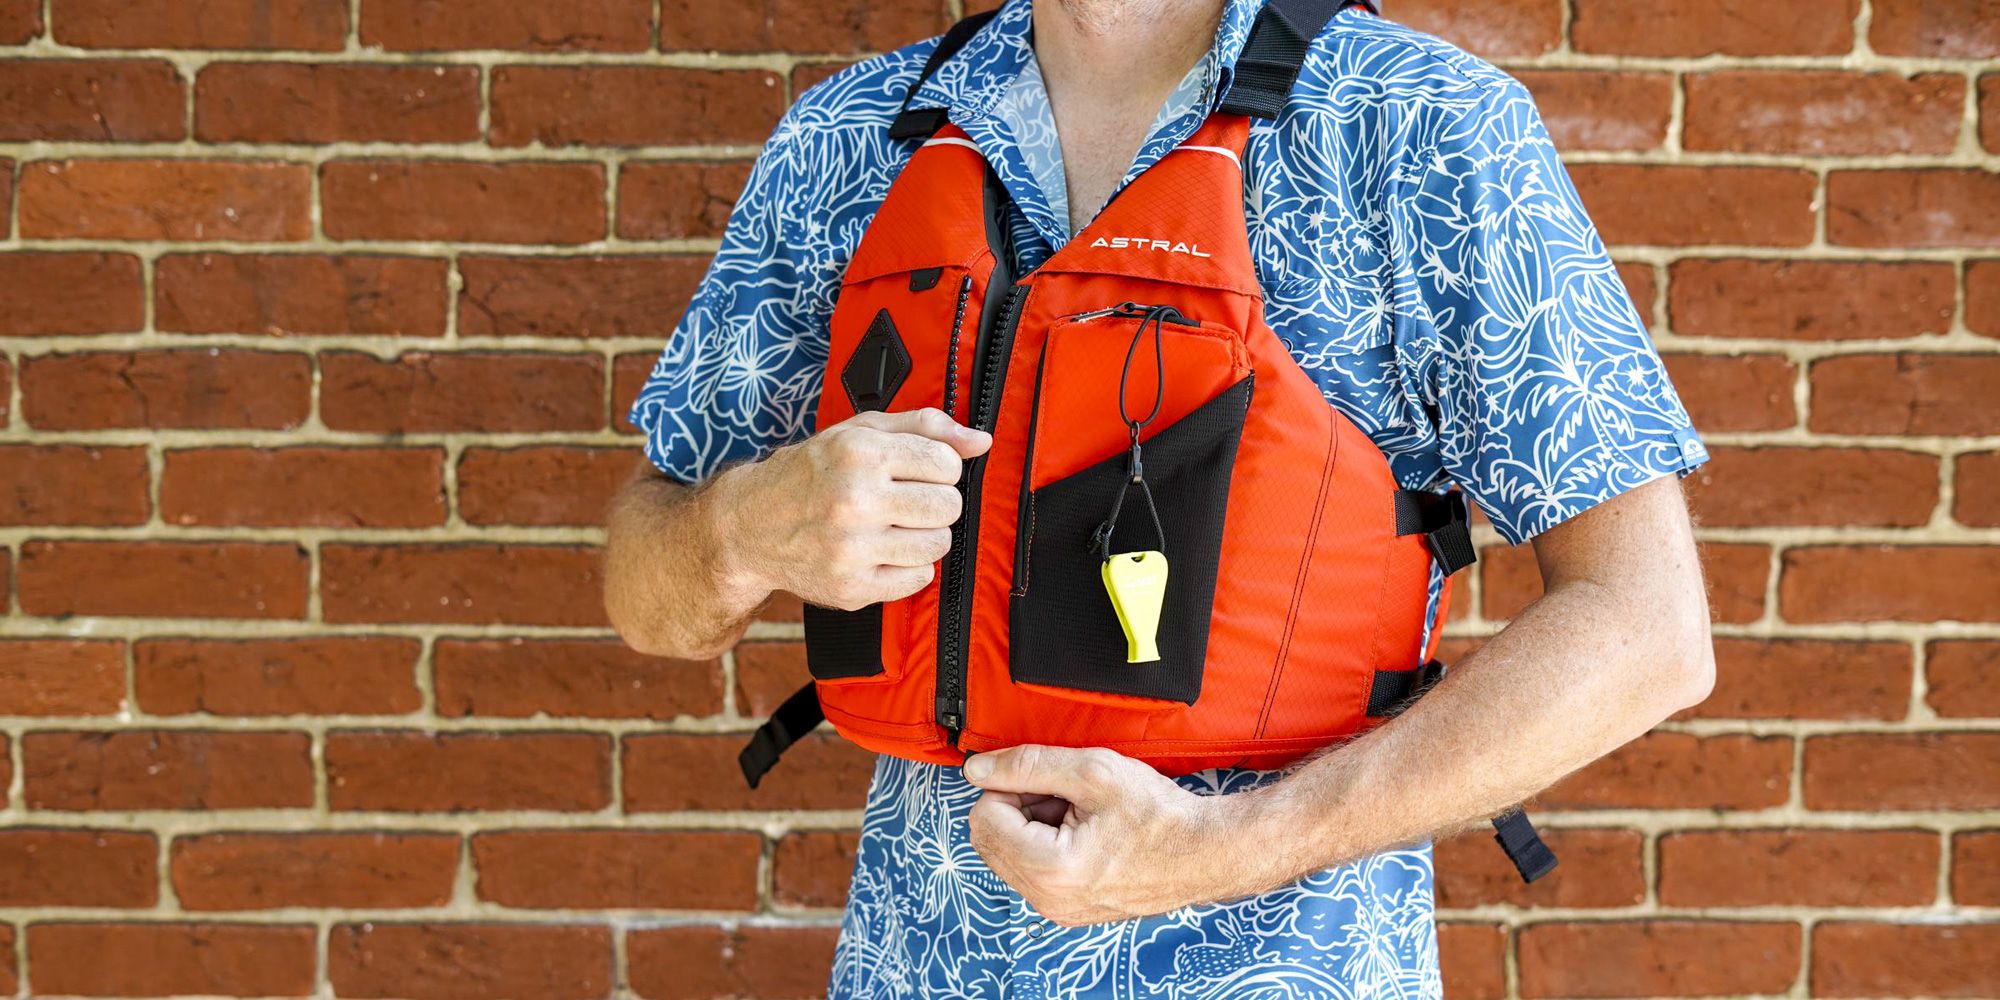 Life Jackets & Preservers for sale